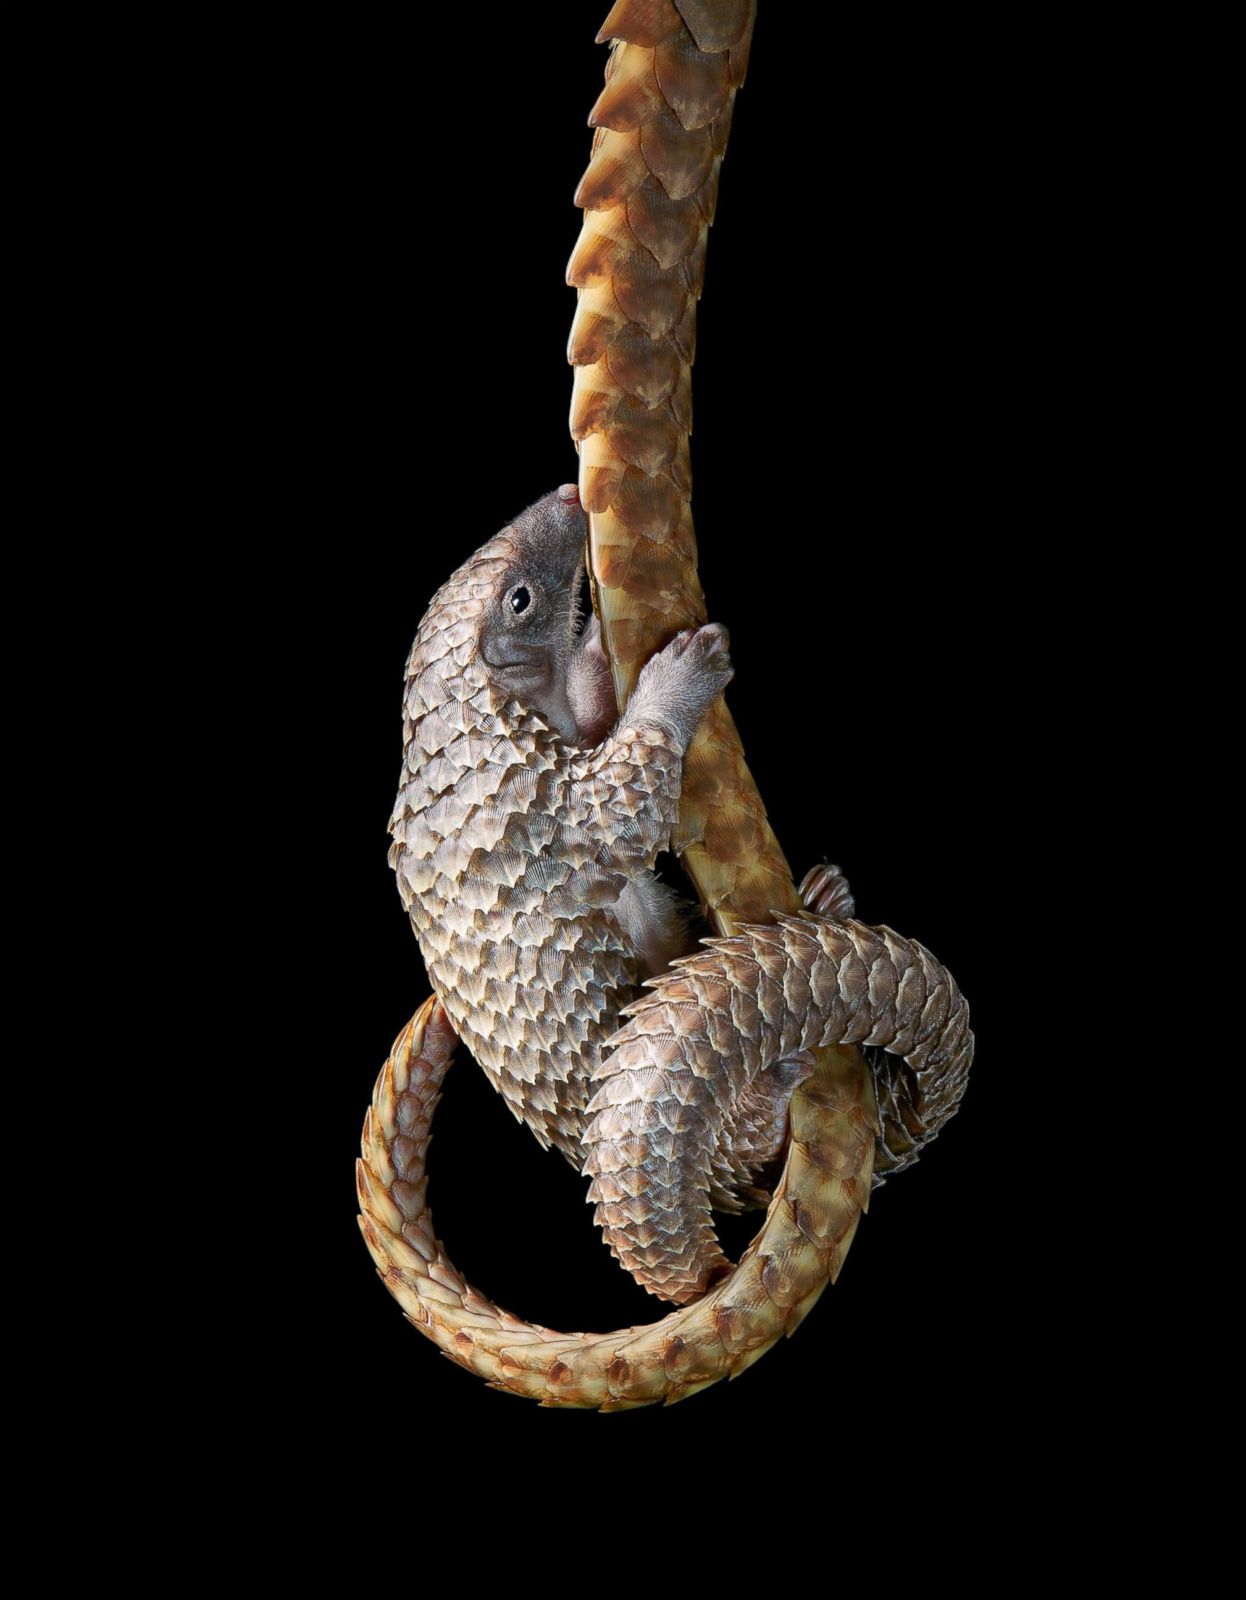 IUCN White-Bellied Pangolin Threat Level: Vulnerable Picture | 'Endangered' captures ...1246 x 1600